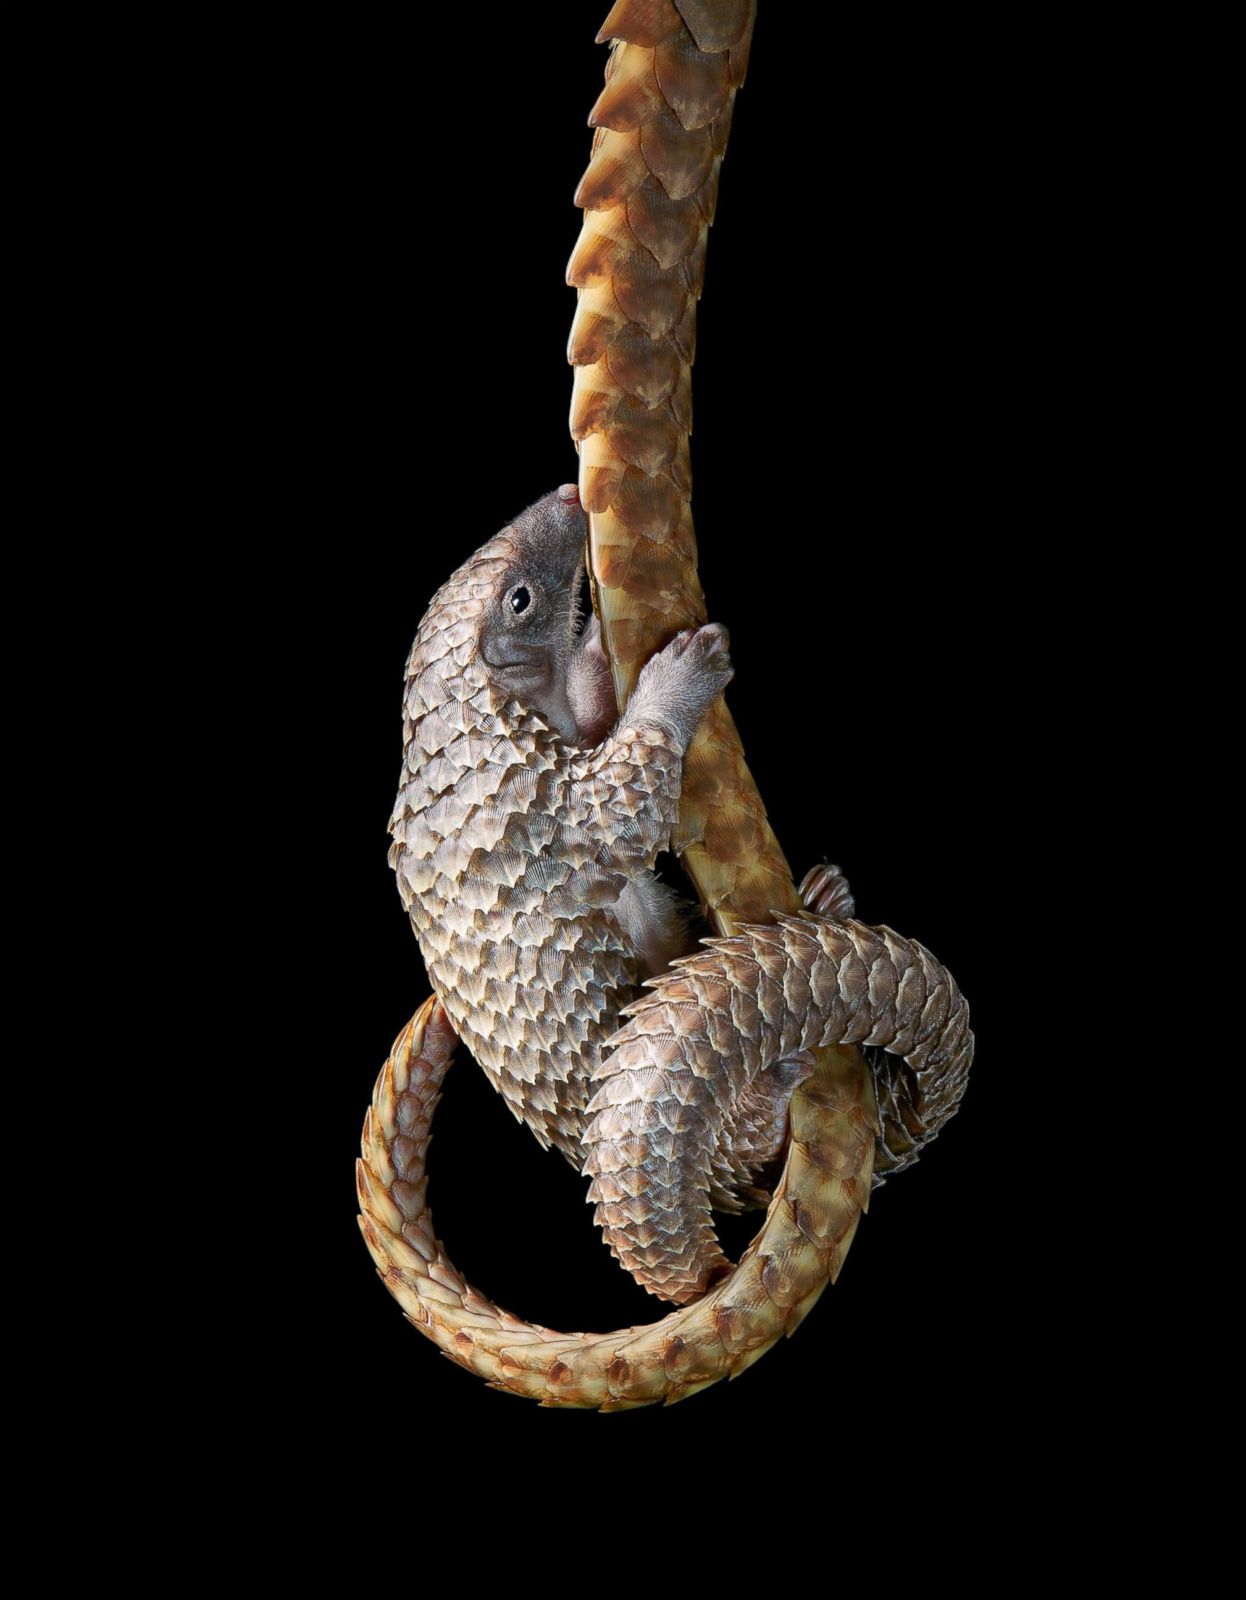 IUCN White-Bellied Pangolin Threat Level: Vulnerable Picture | 'Endangered' captures ...1246 x 1600